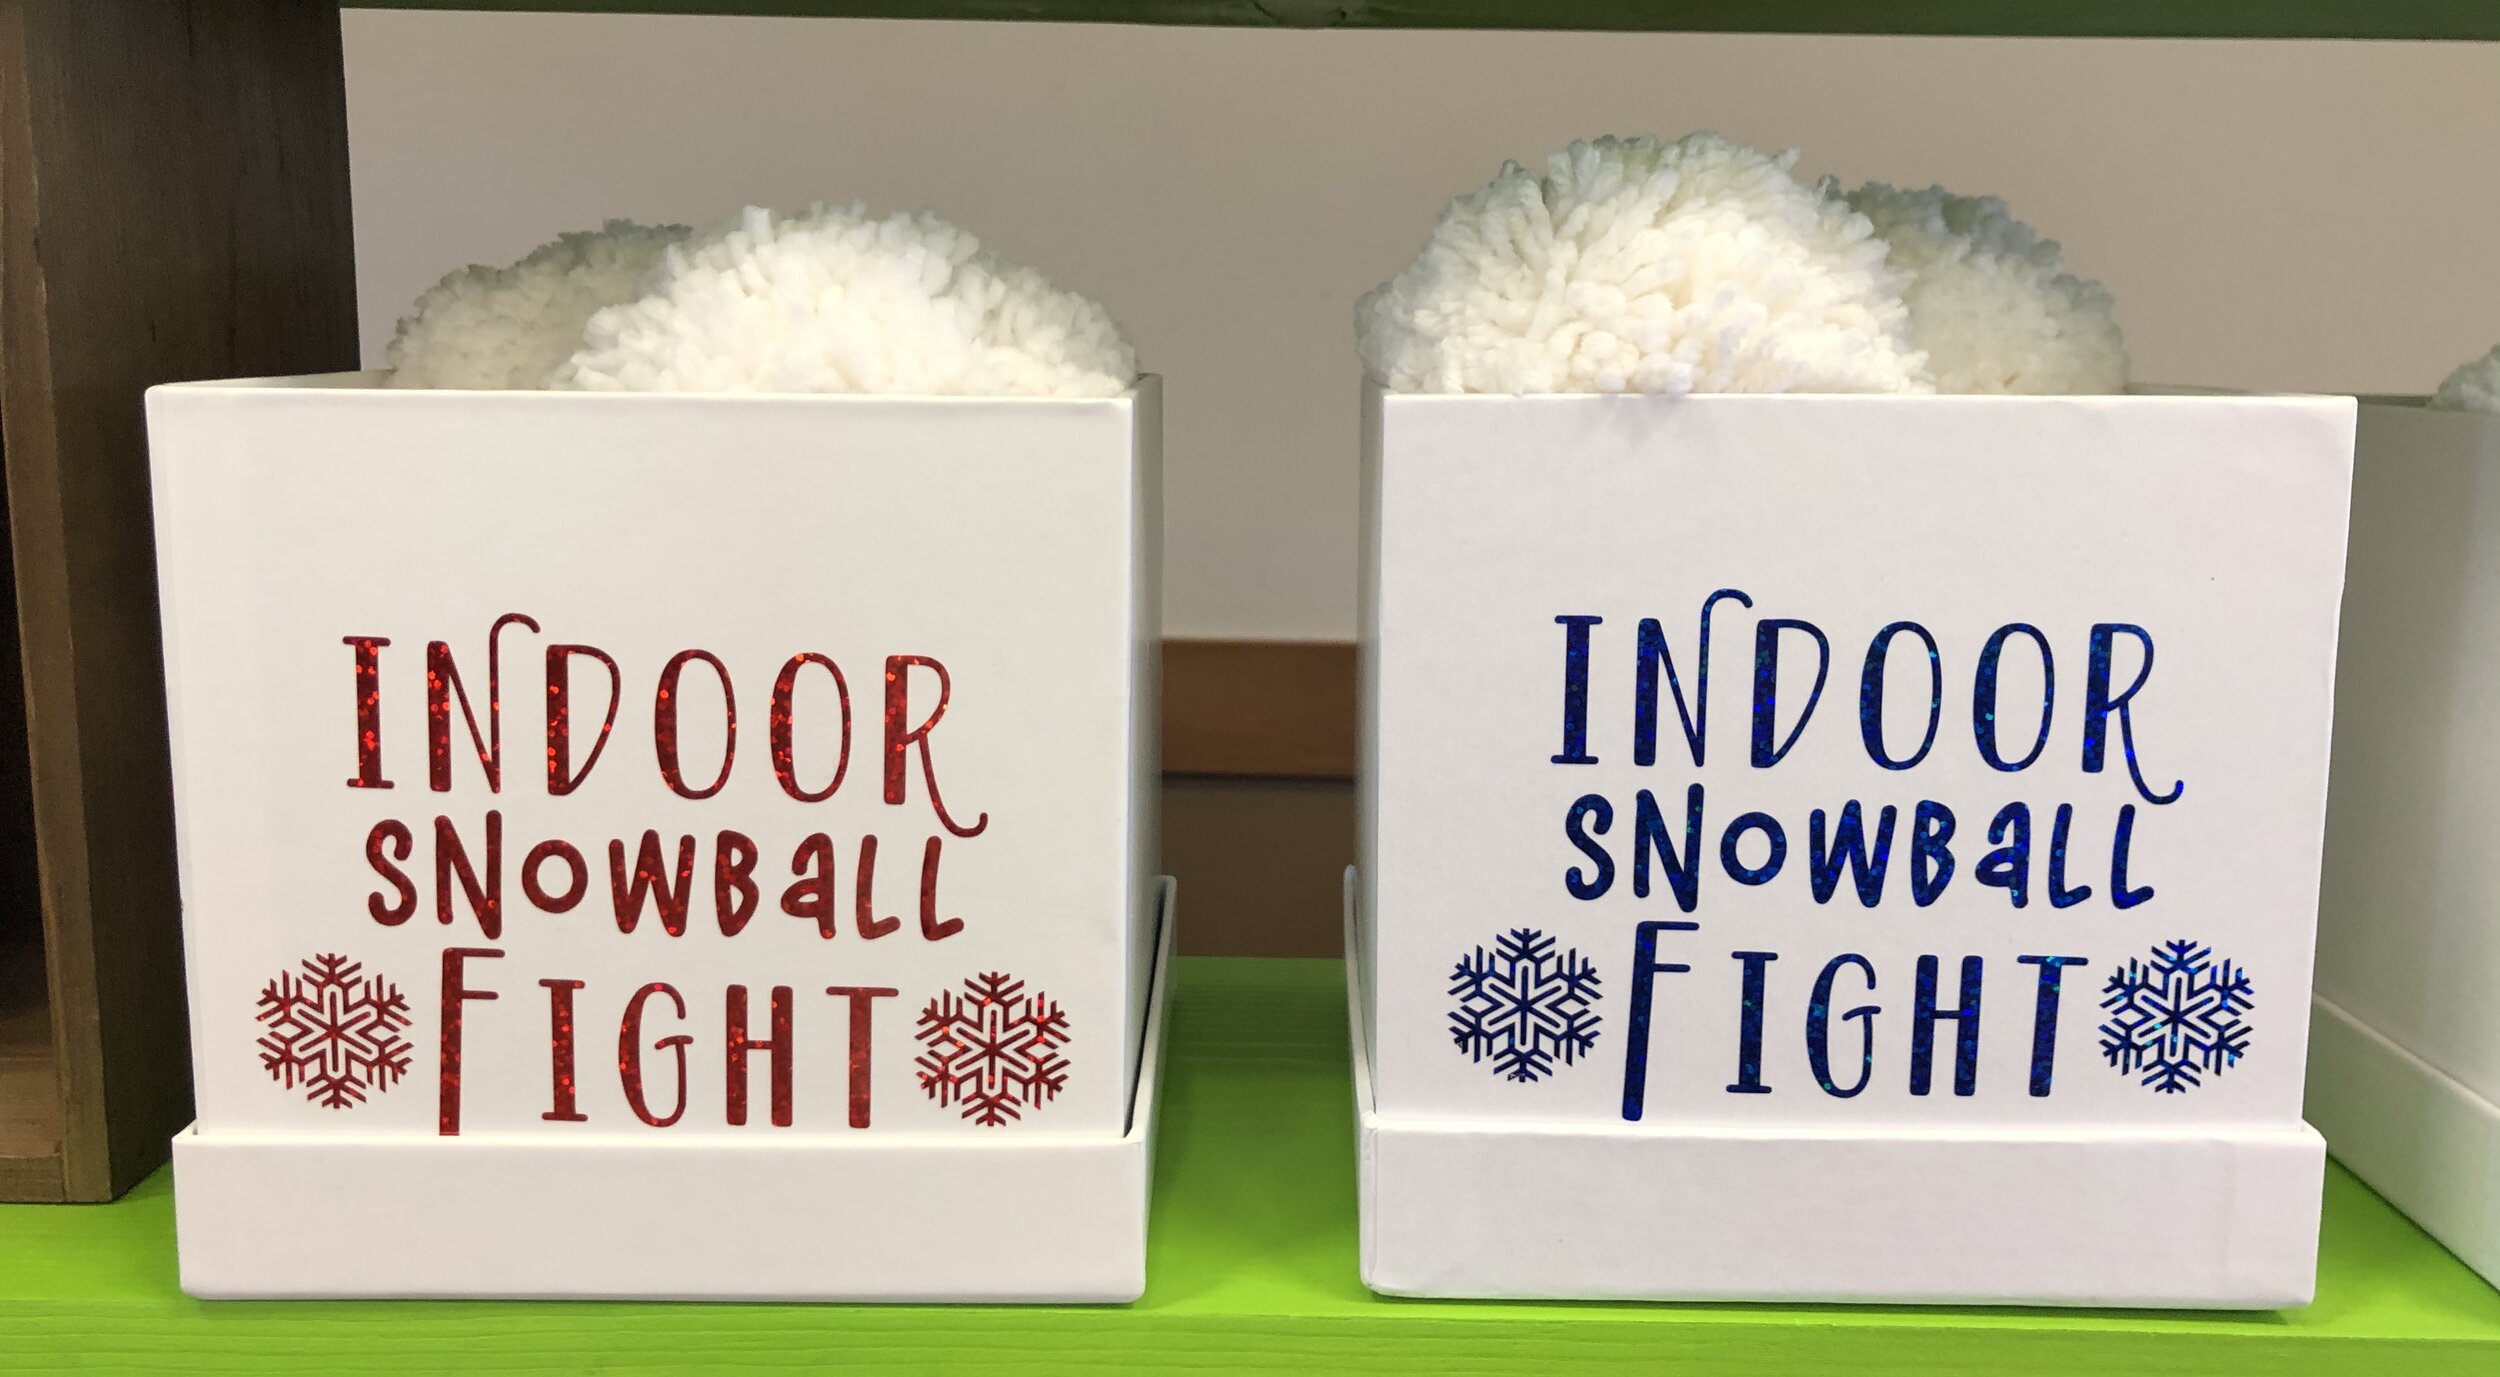 Upcycled Indoor Snowball Fight Wood Crate - Interior Frugalista